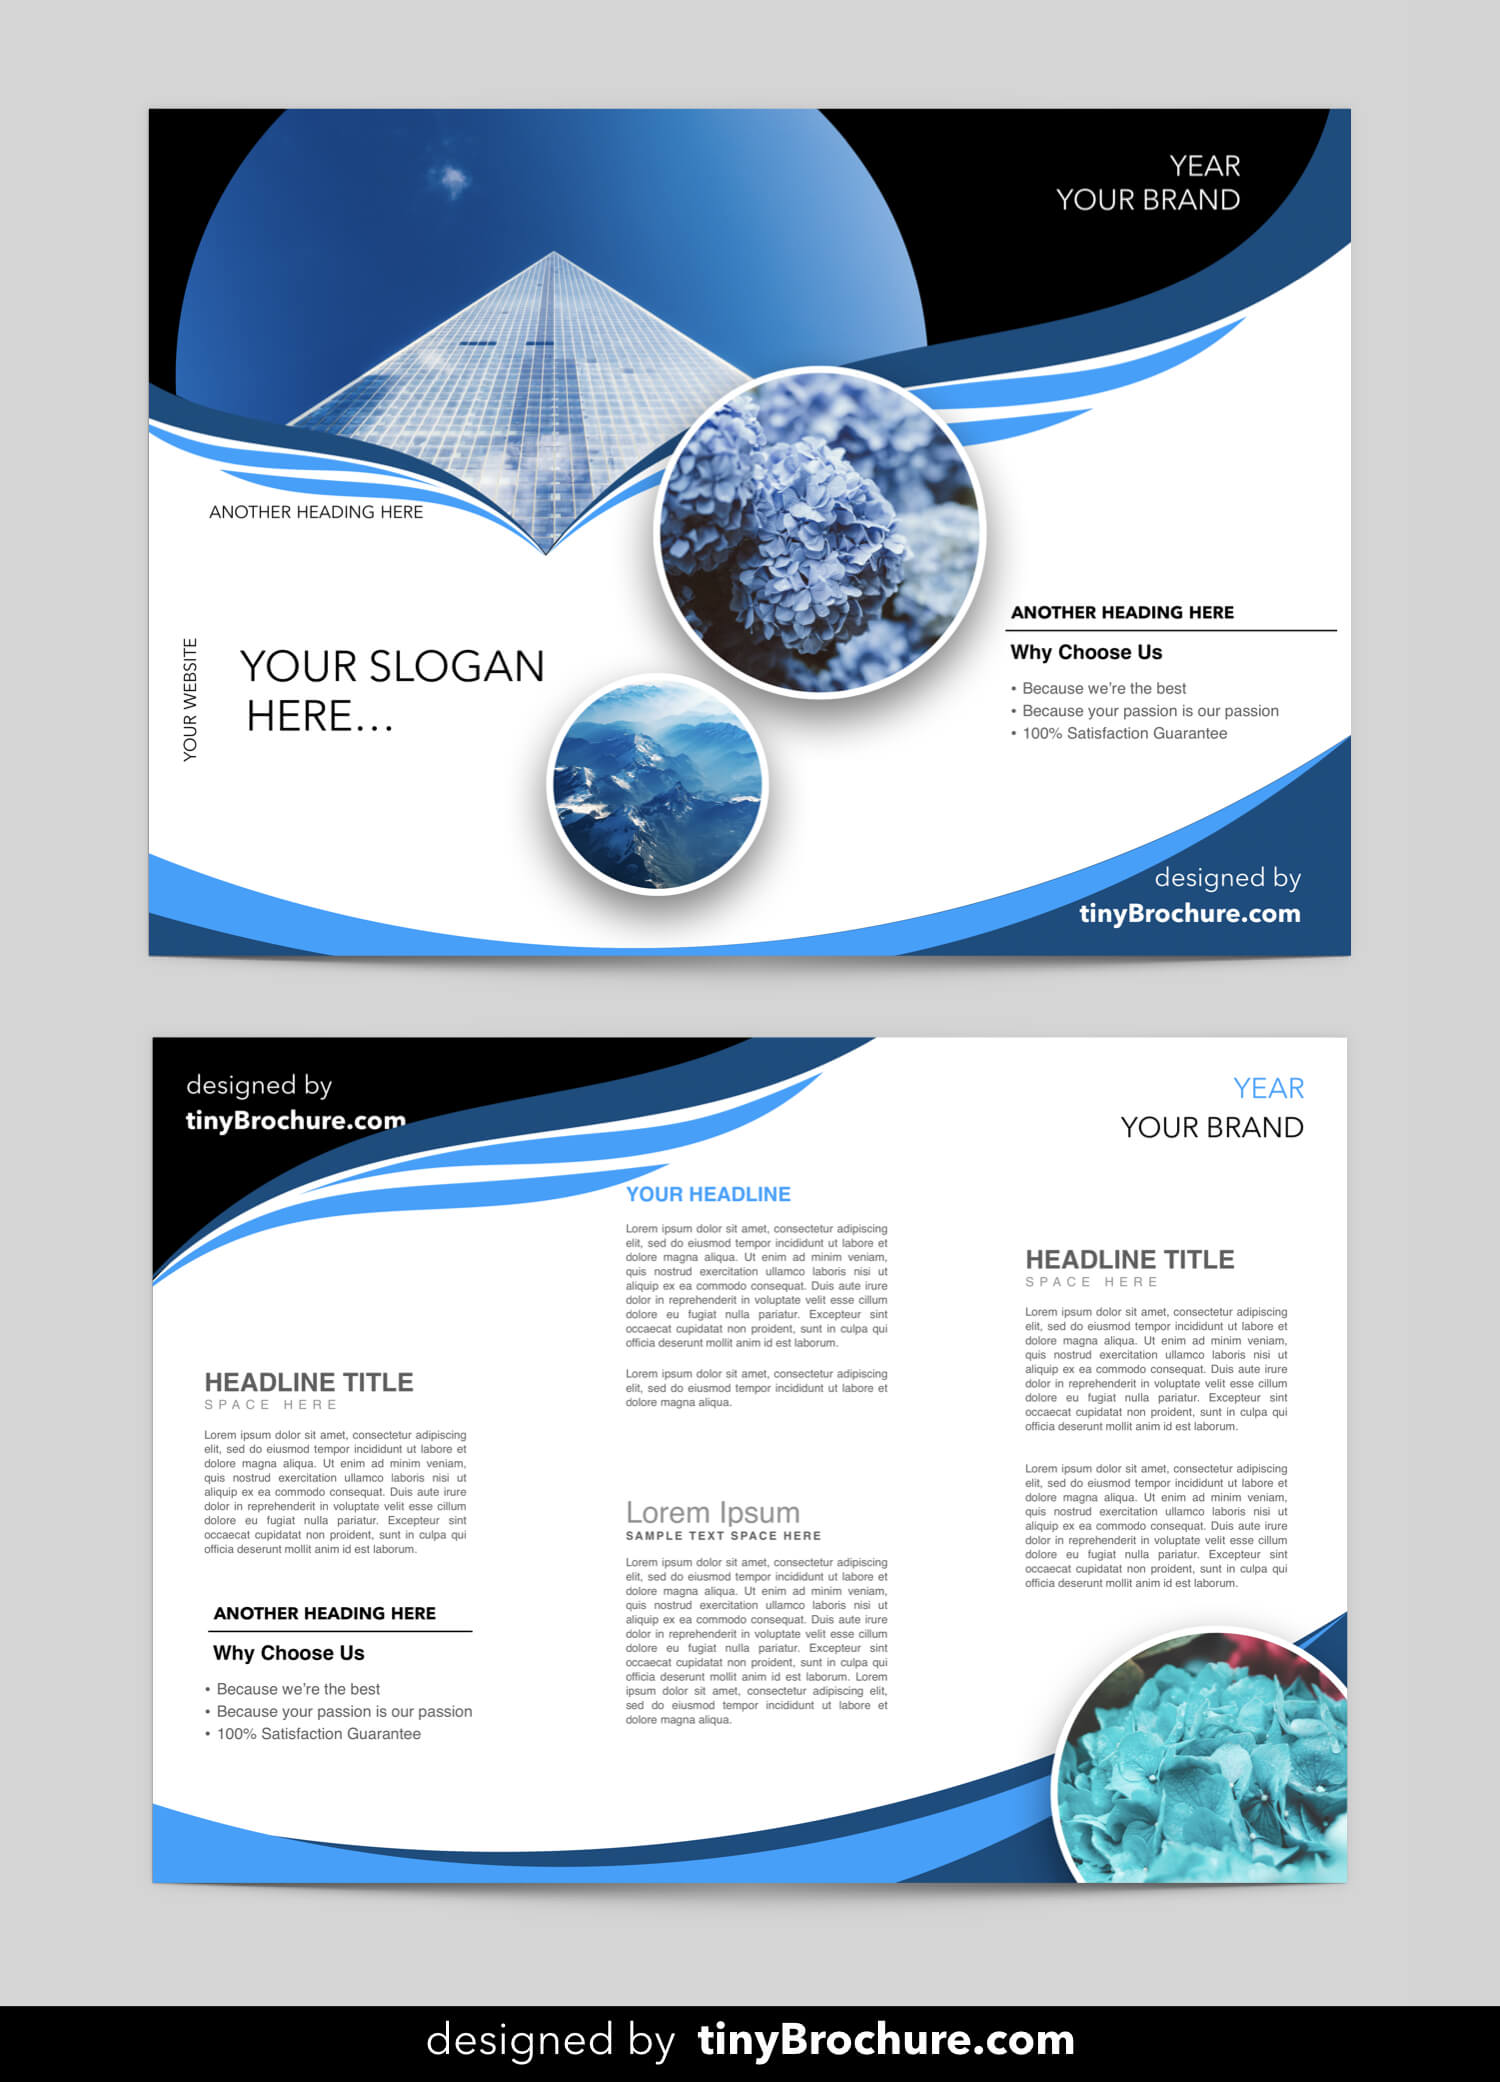 003 Microsoft Brochure Template Free Ideas Wondrous Within Free Brochure Templates For Word 2010